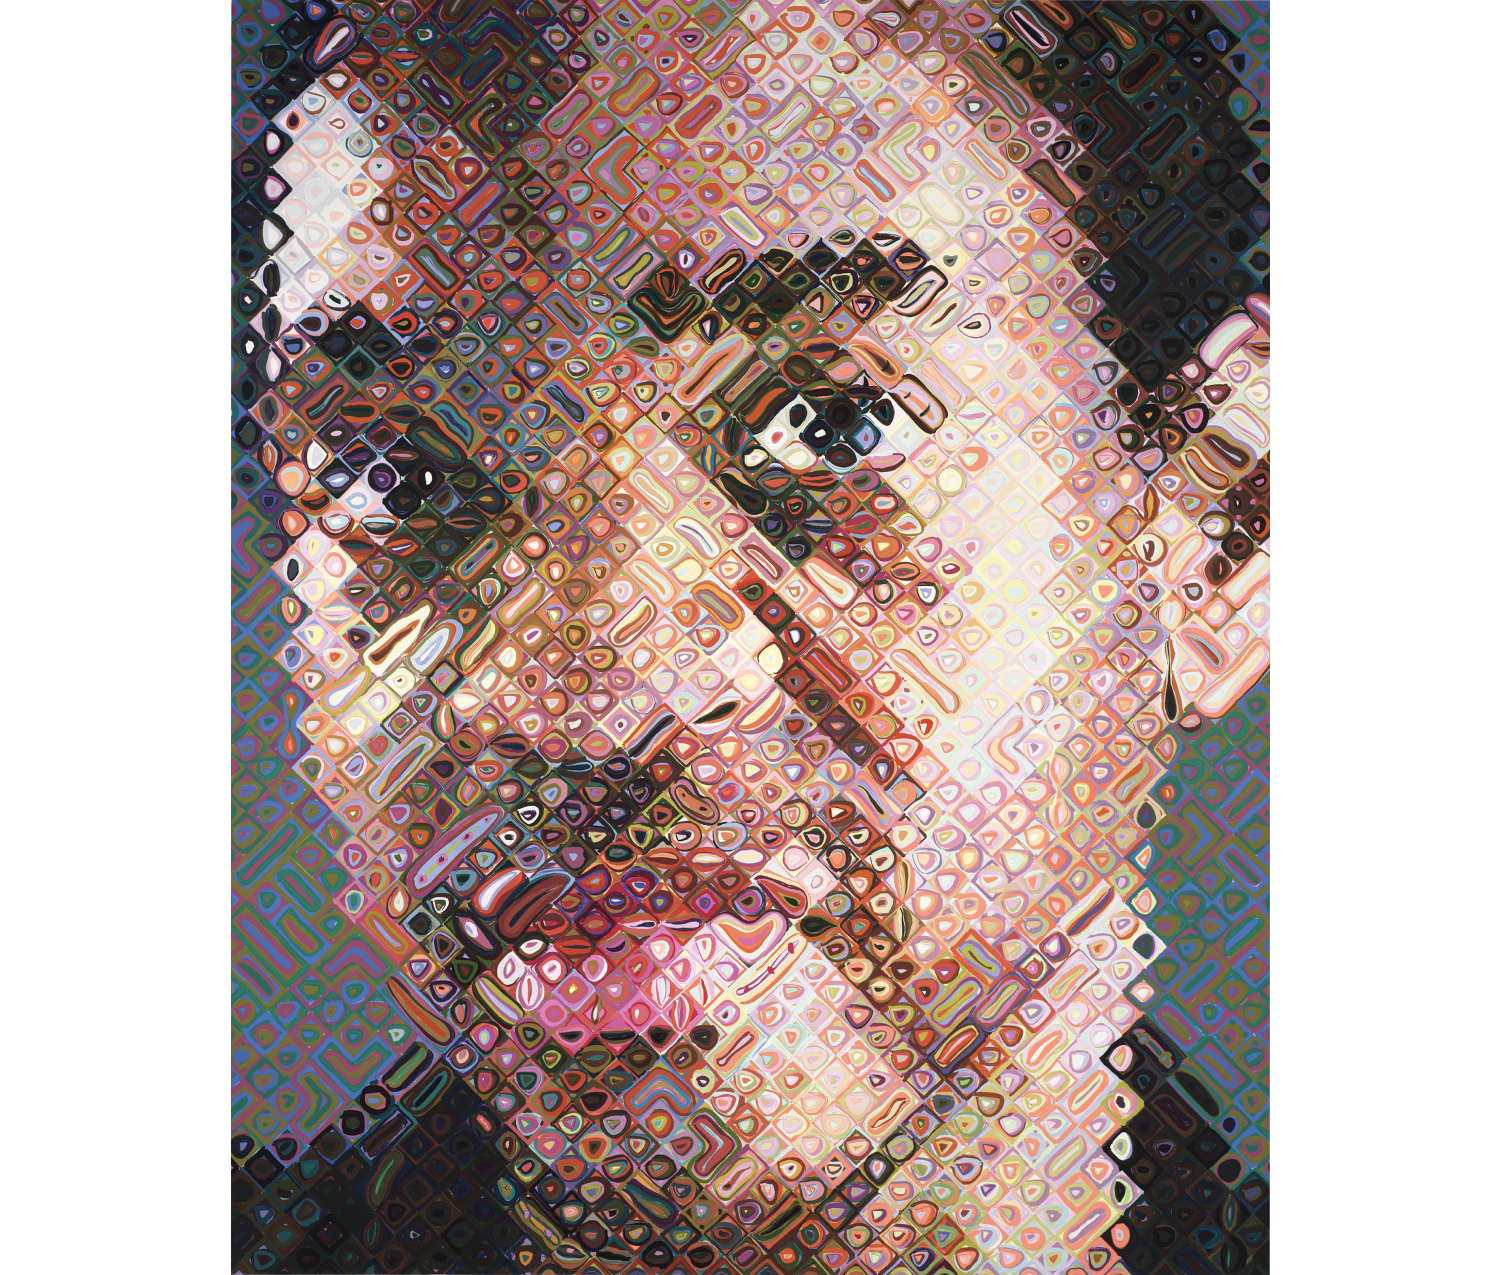 Close-up, pixelated portrait of African-American man with head turned slightly to the left.